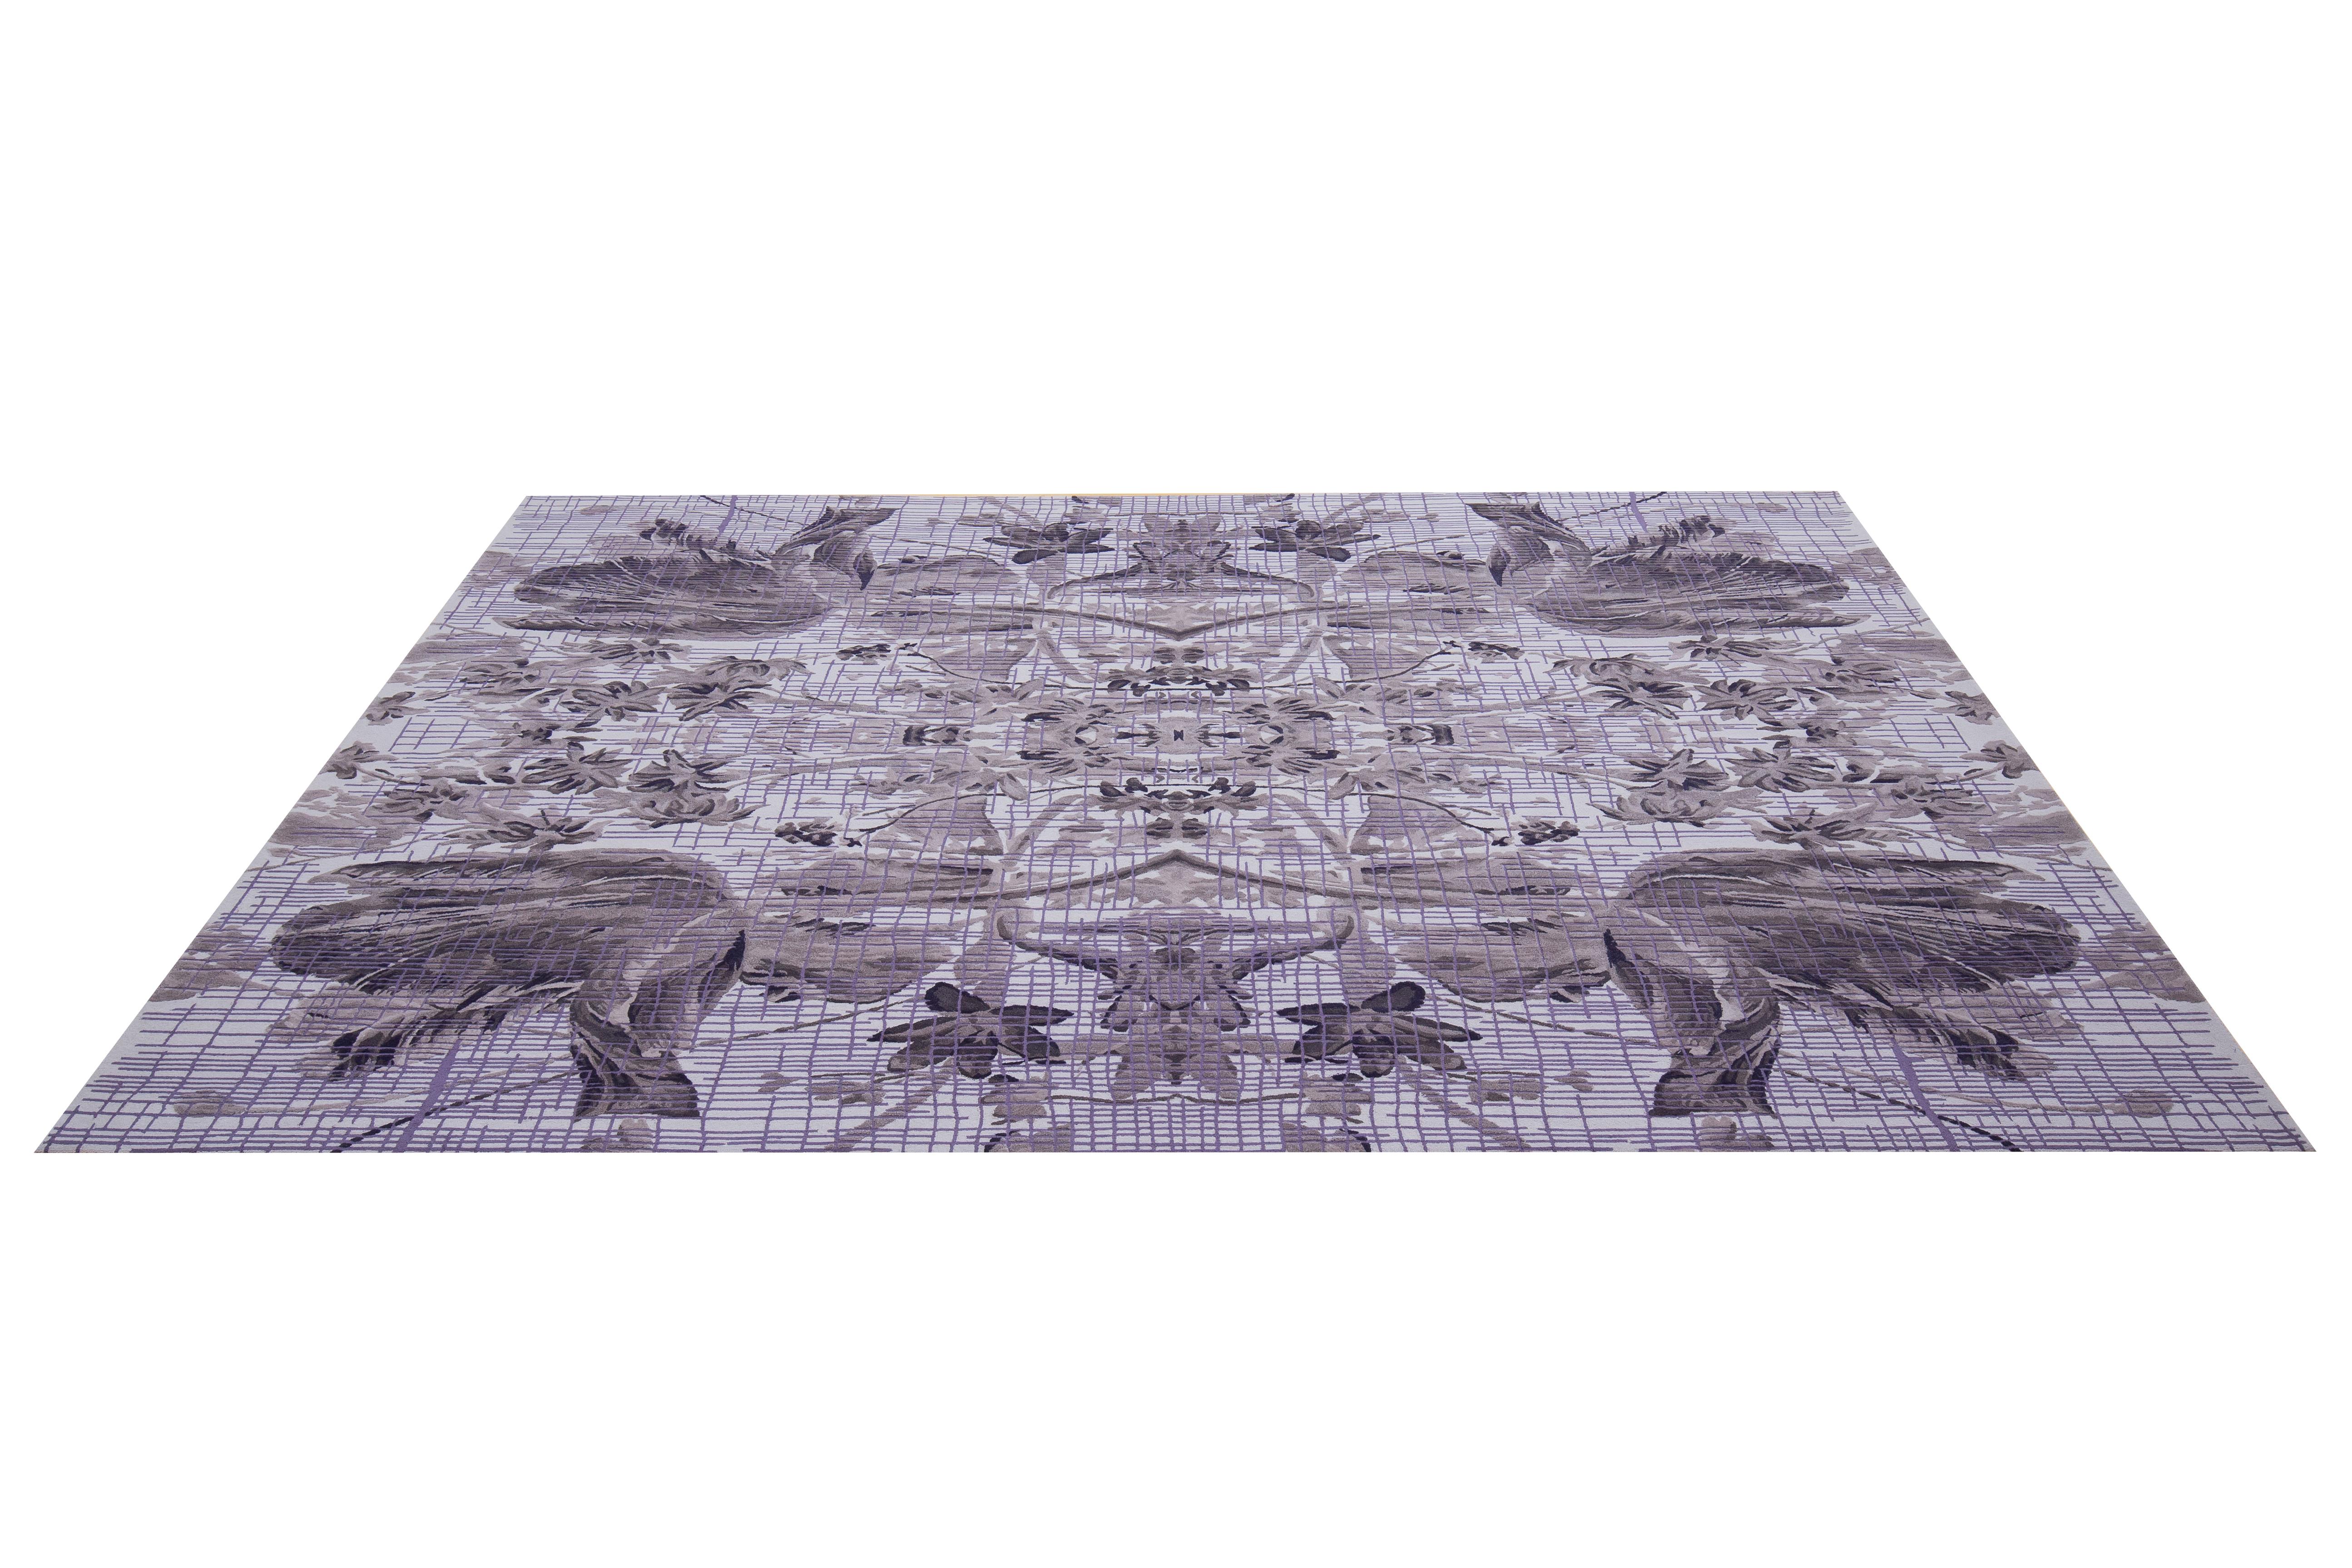 Reminiscent of the Garden of Eden, Omar Khan composes symmetrical flowers in swathes of ombre periwinkle tones that rhythmically dance across the face of the rug. 

Mirrored tulips is layered, highly-detailed, and meticulously hand-tufted in silk